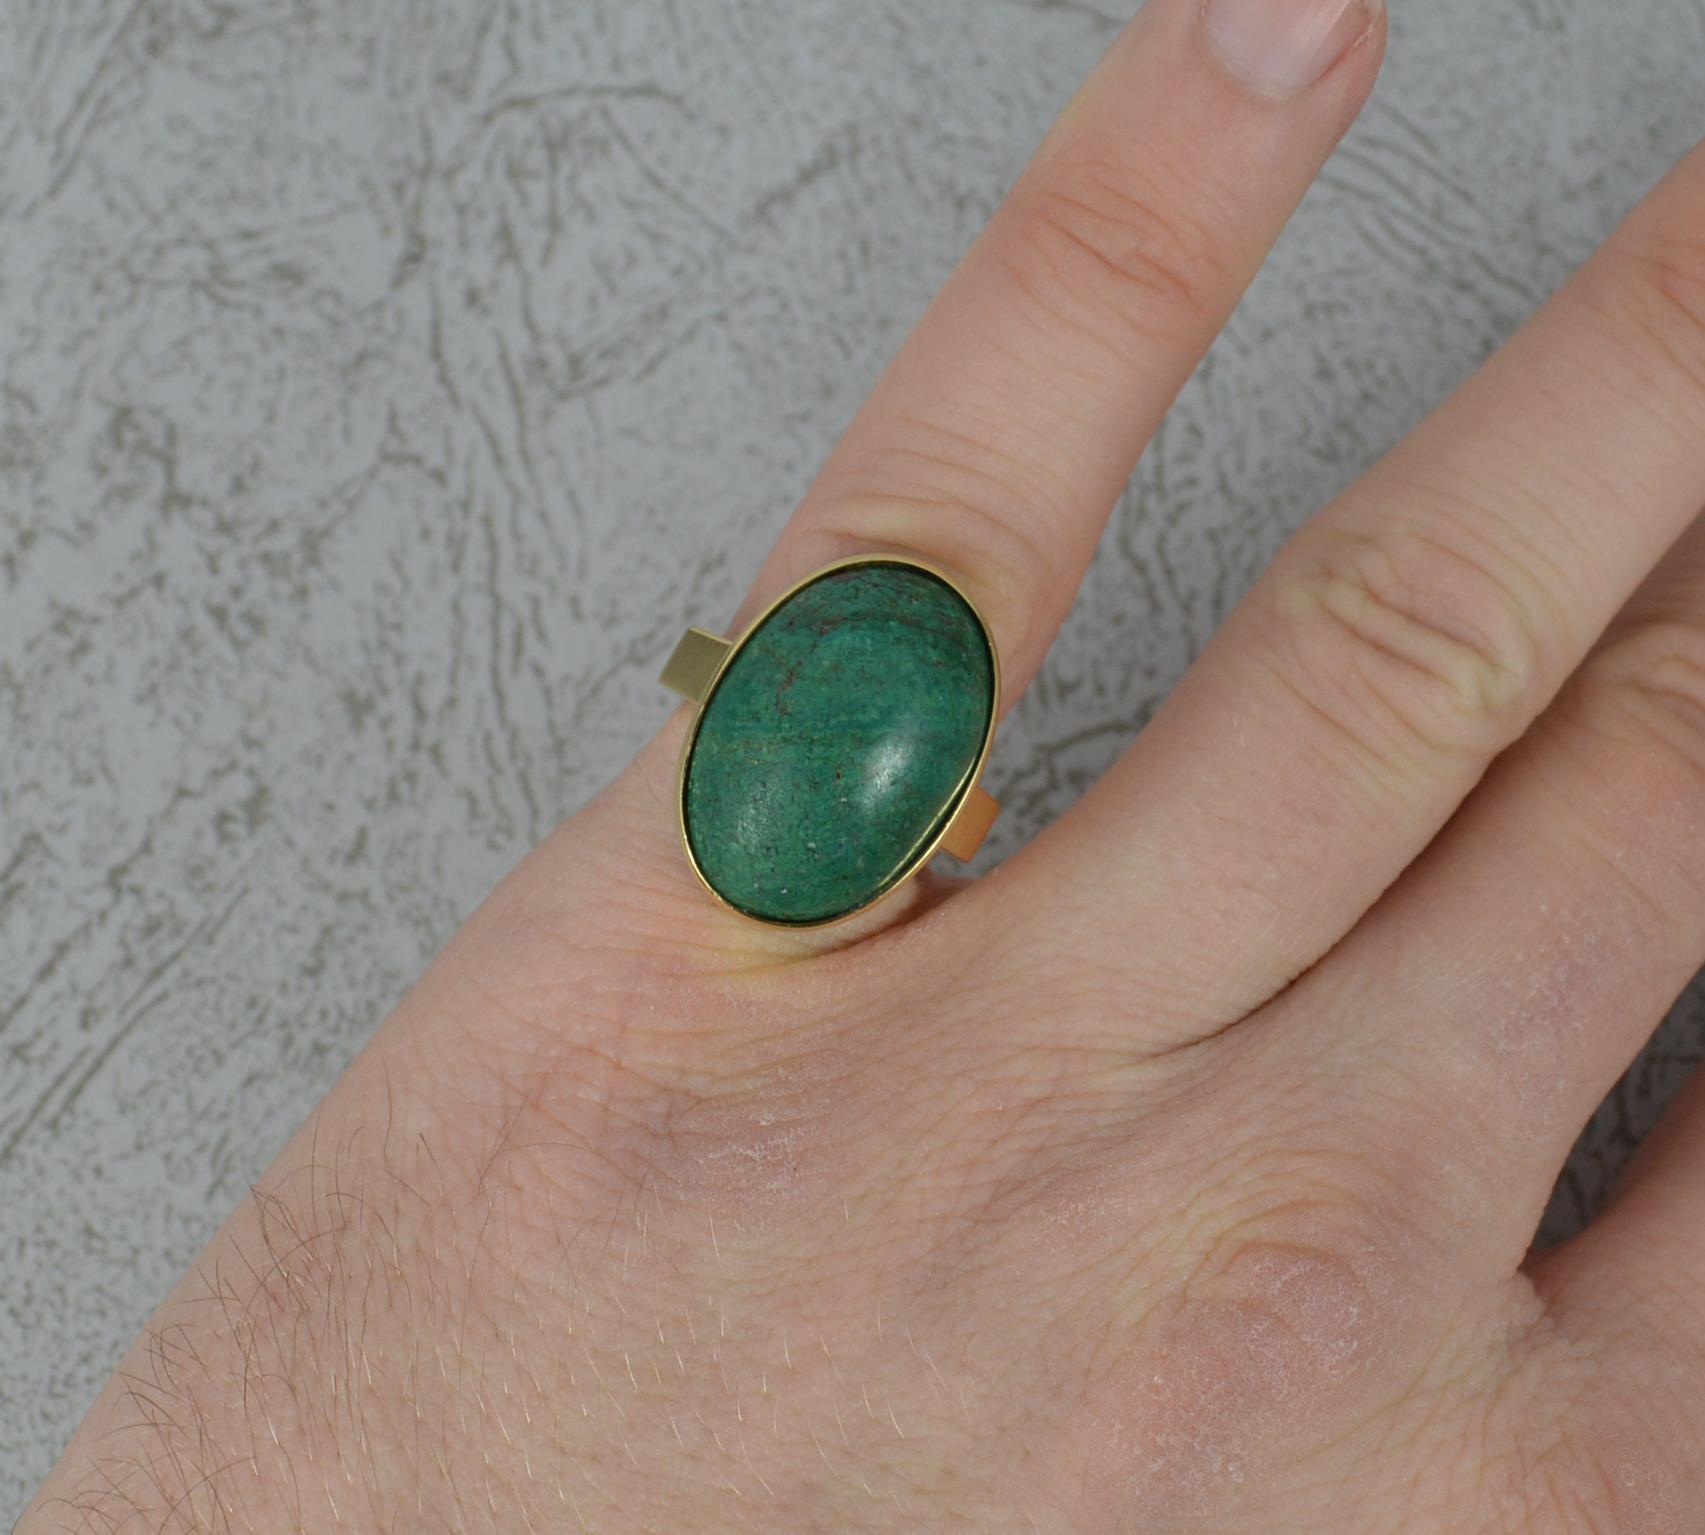 A superb Malachite ring in 18 carat gold.
14ct yellow gold shank and setting.
Designed with a large malachite to the centre 14mm x 20mm, in bezel setting. Protruding 9mm off the finger.
Solid shank, good gauge, attractive shape.

CONDITION ;